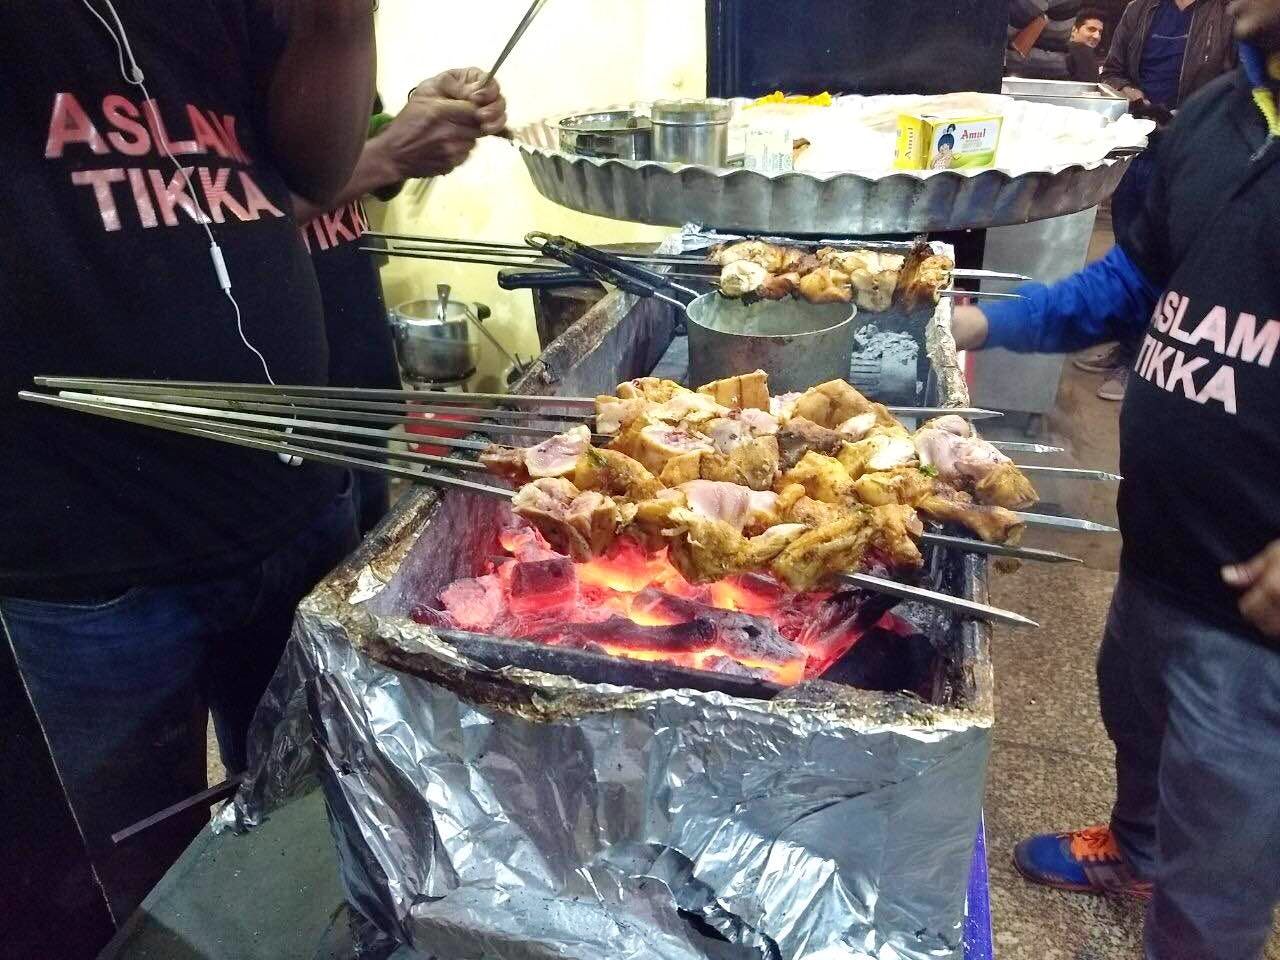 Barbecue,Grilling,Barbecue grill,Food,Roasting,Outdoor grill,Dish,Cuisine,Cooking,Street food